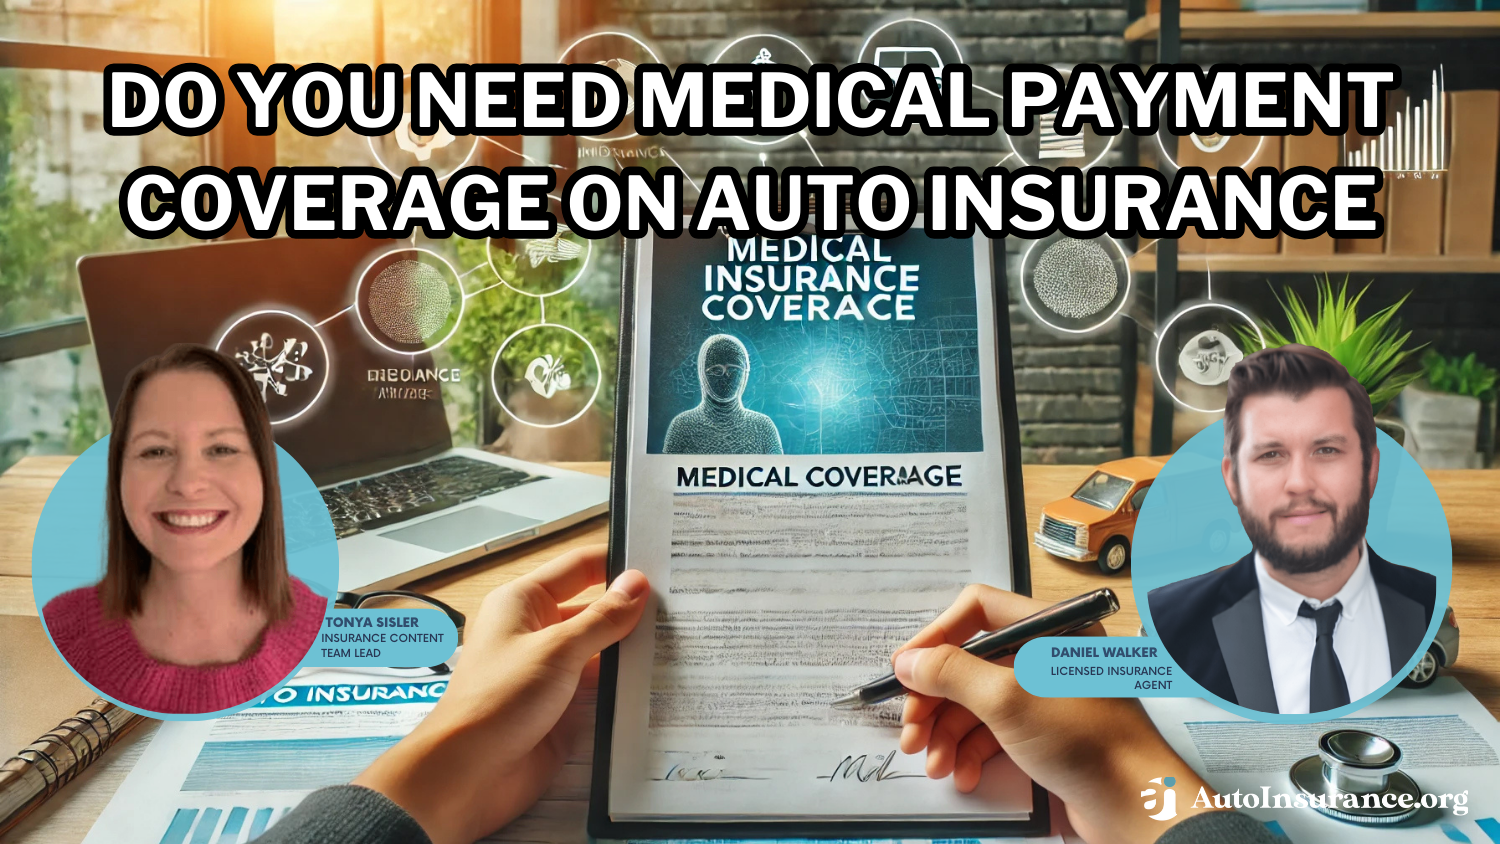 Do you need medical payment coverage on auto insurance?